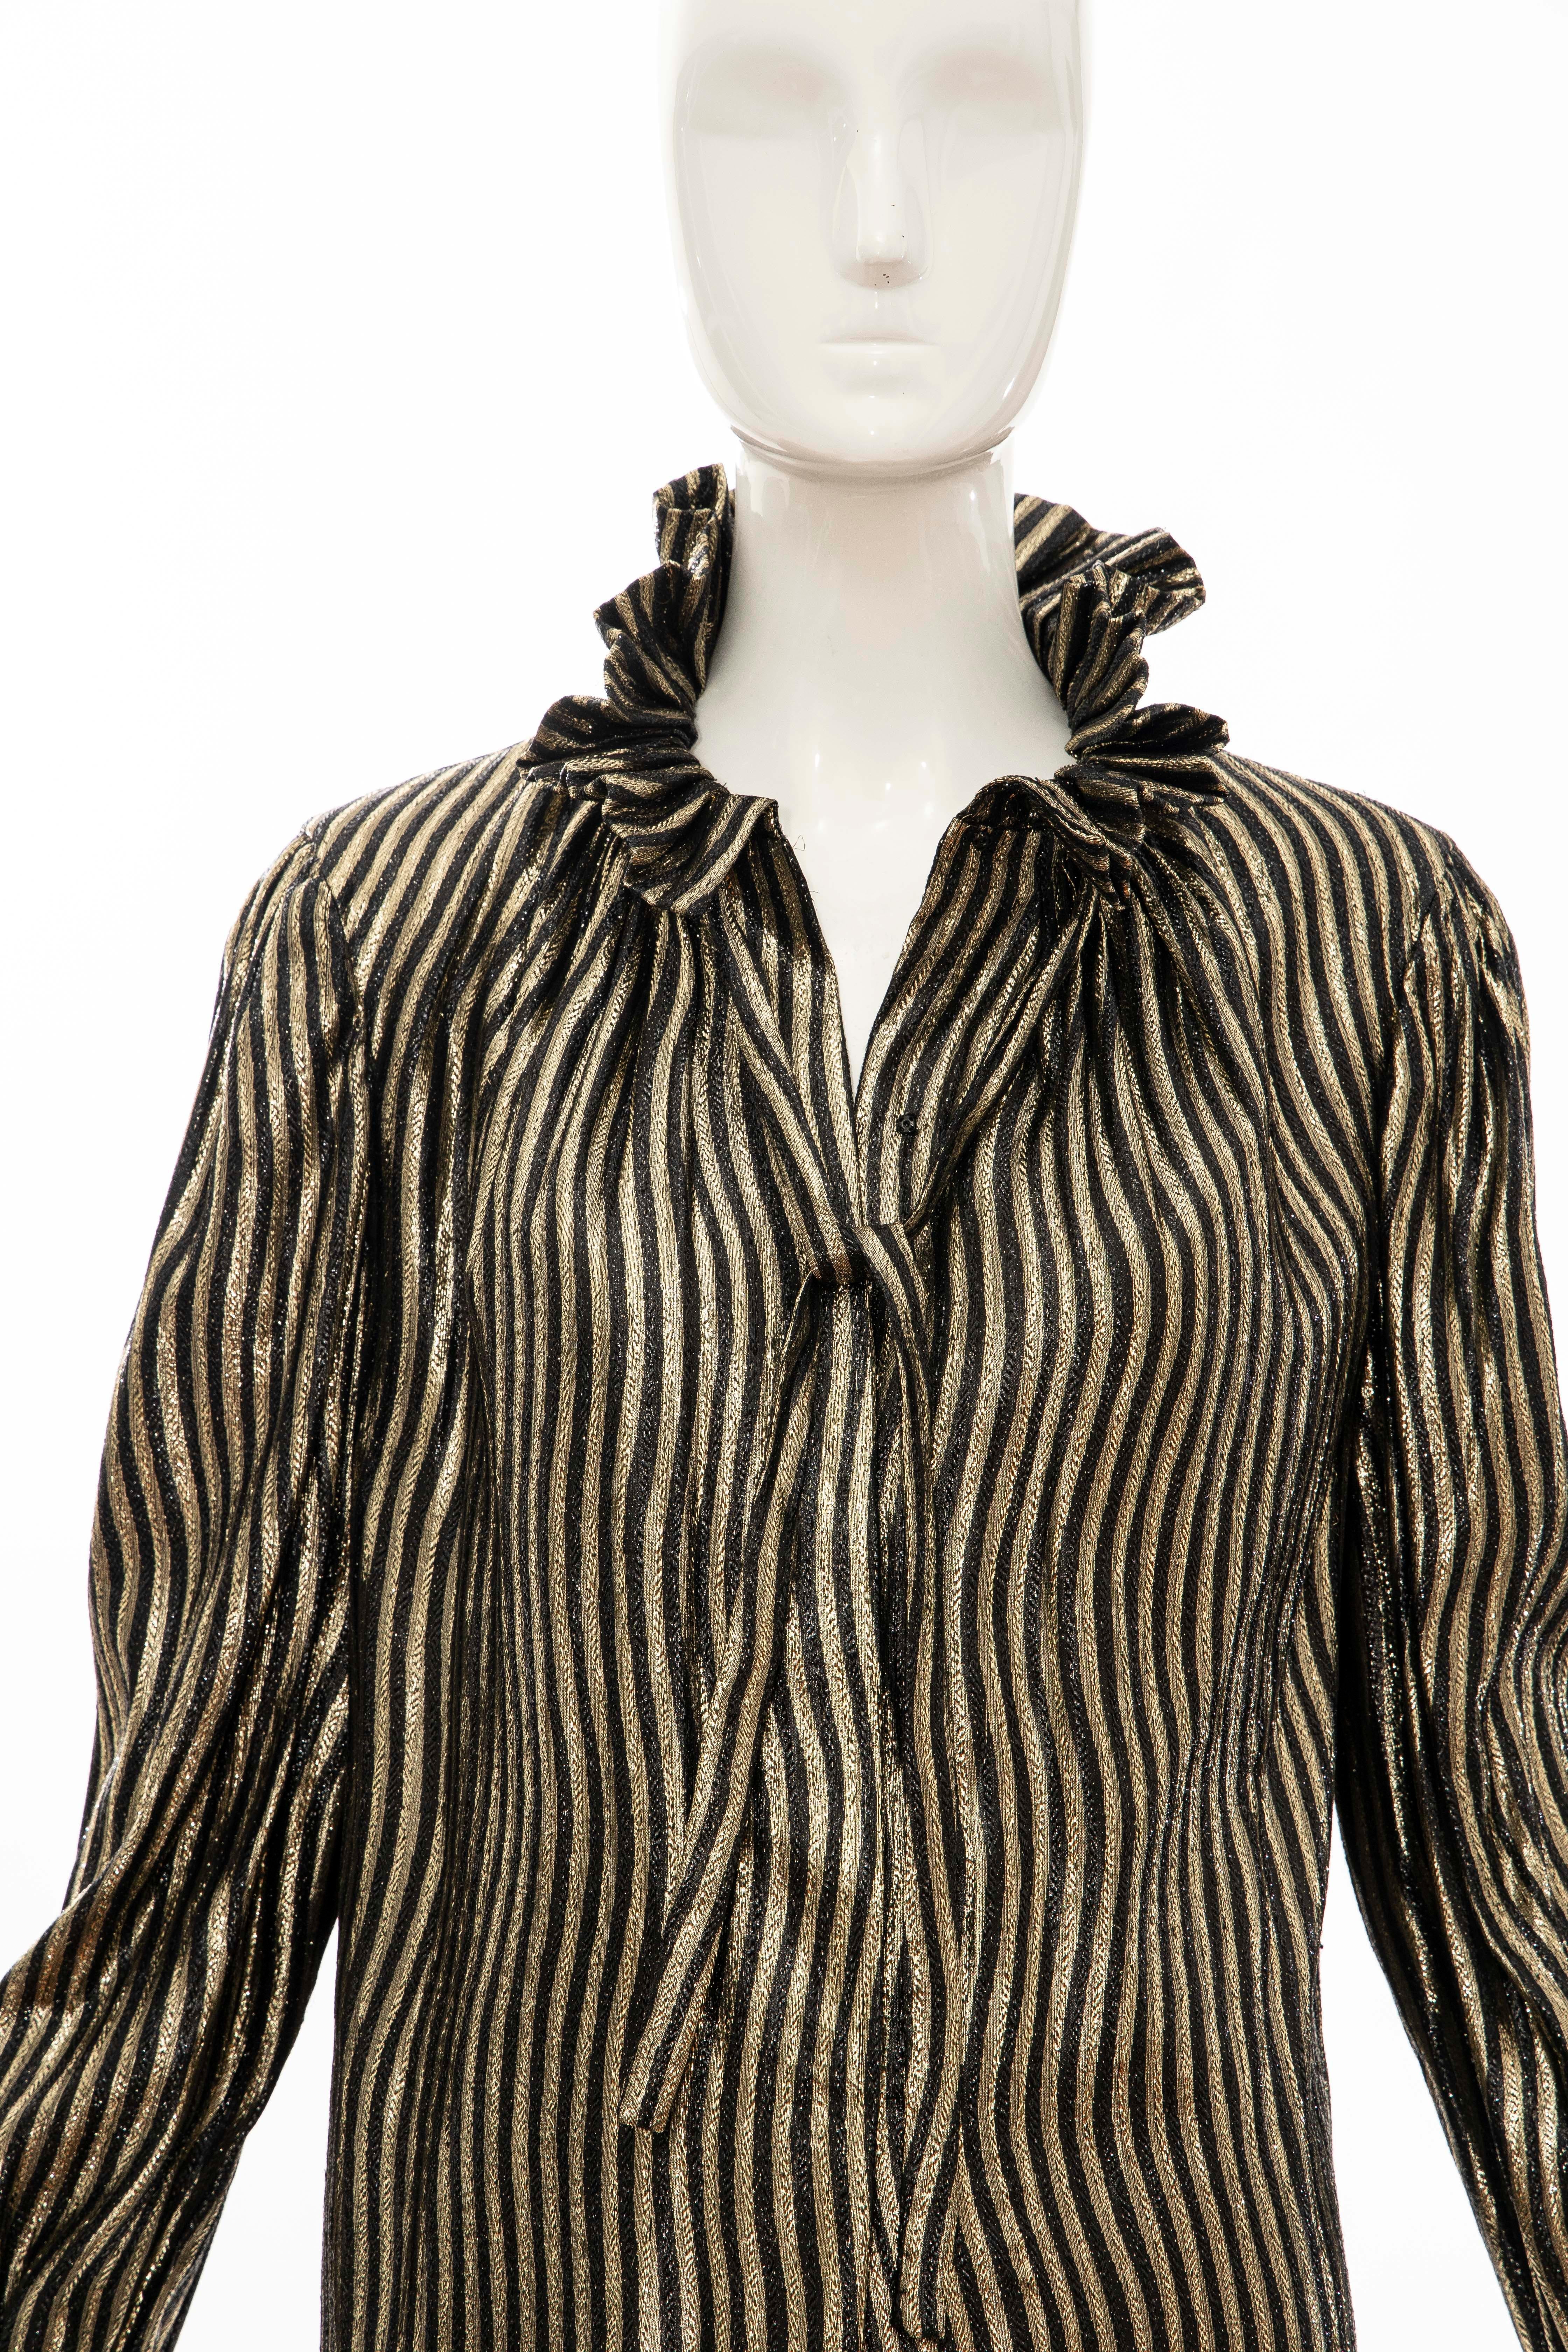 Pauline Trigere Black Gold Striped Metallic Snap Front Blouse, Circa: 1970's For Sale 10